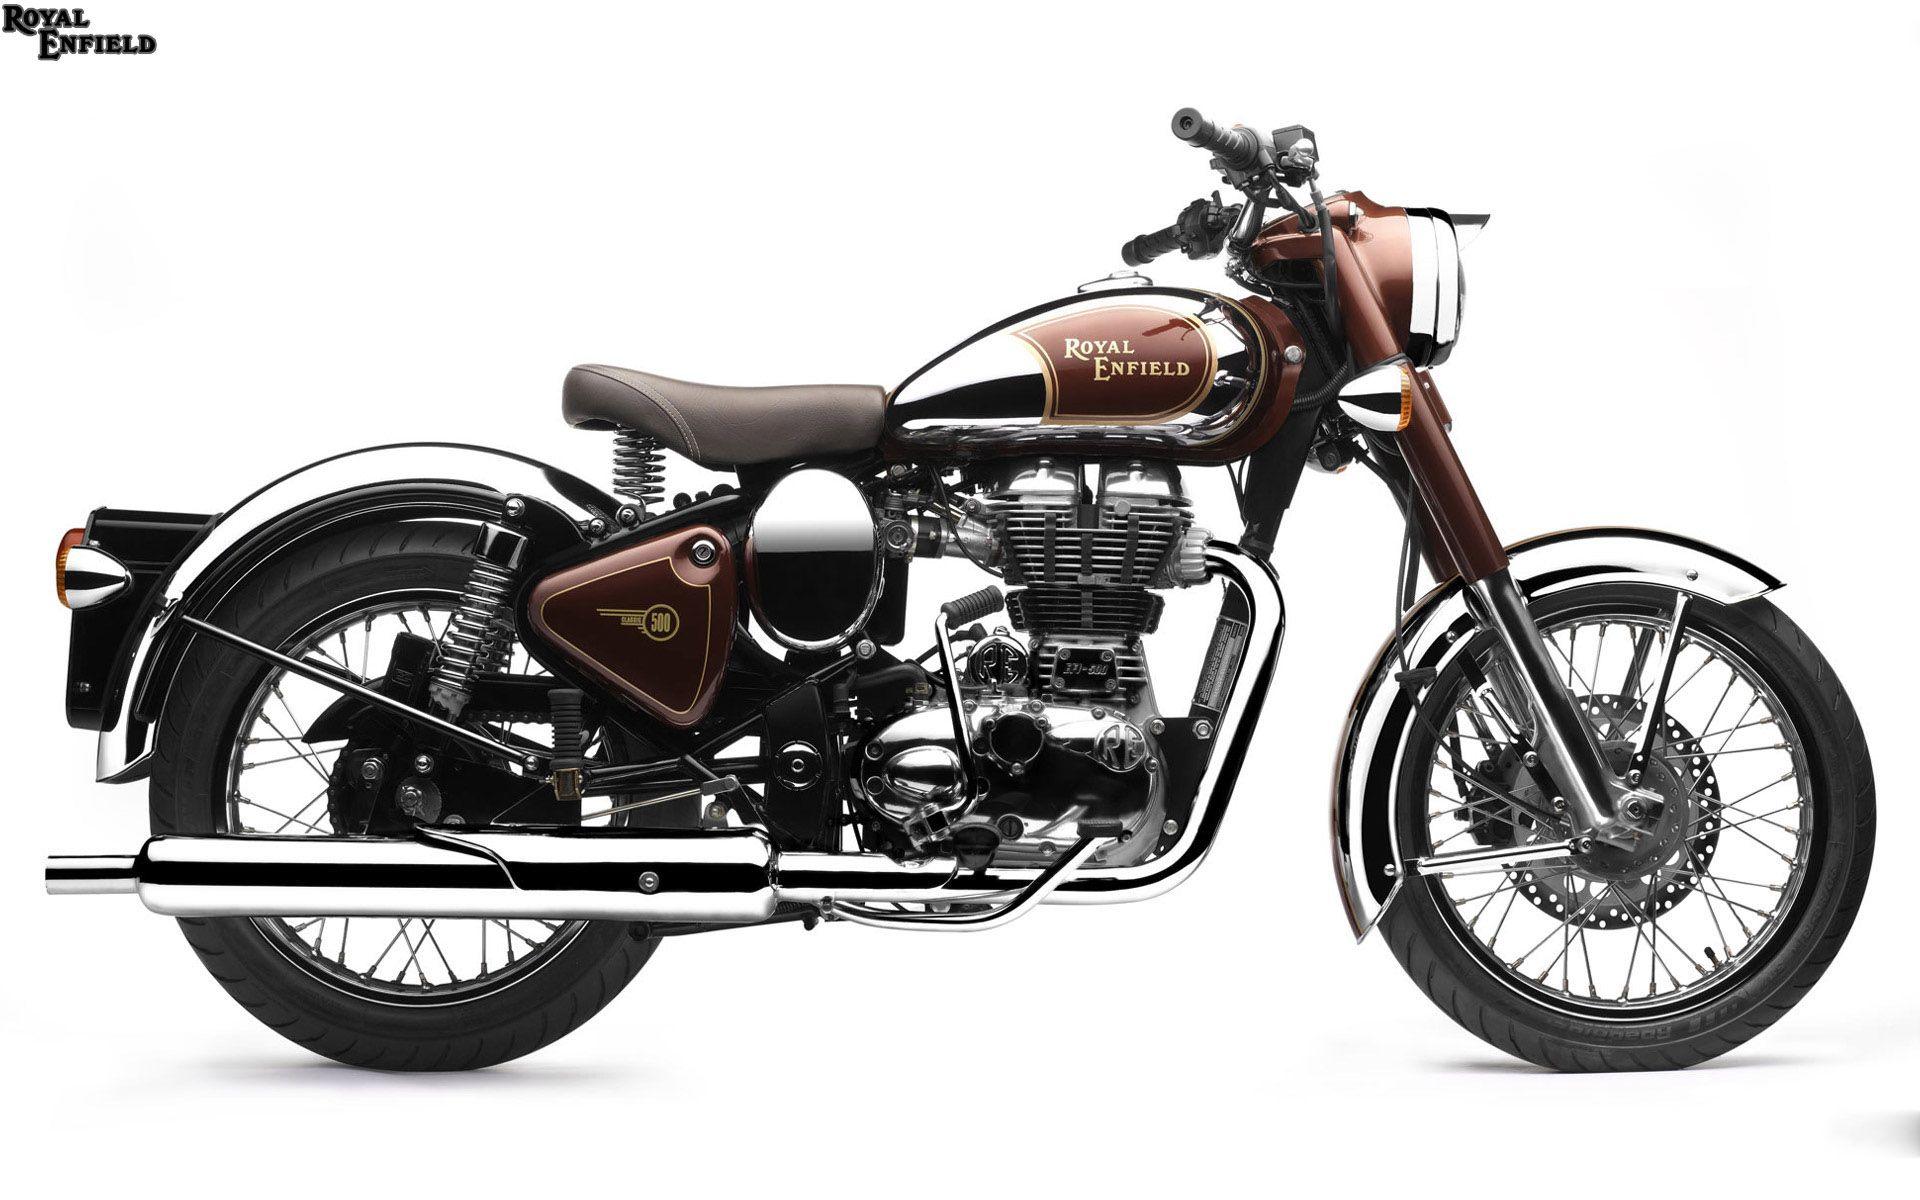 Royal Enfield Classic Chrome Wallpaper For Free Download. Royal enfield bullet, Enfield motorcycle, Enfield classic